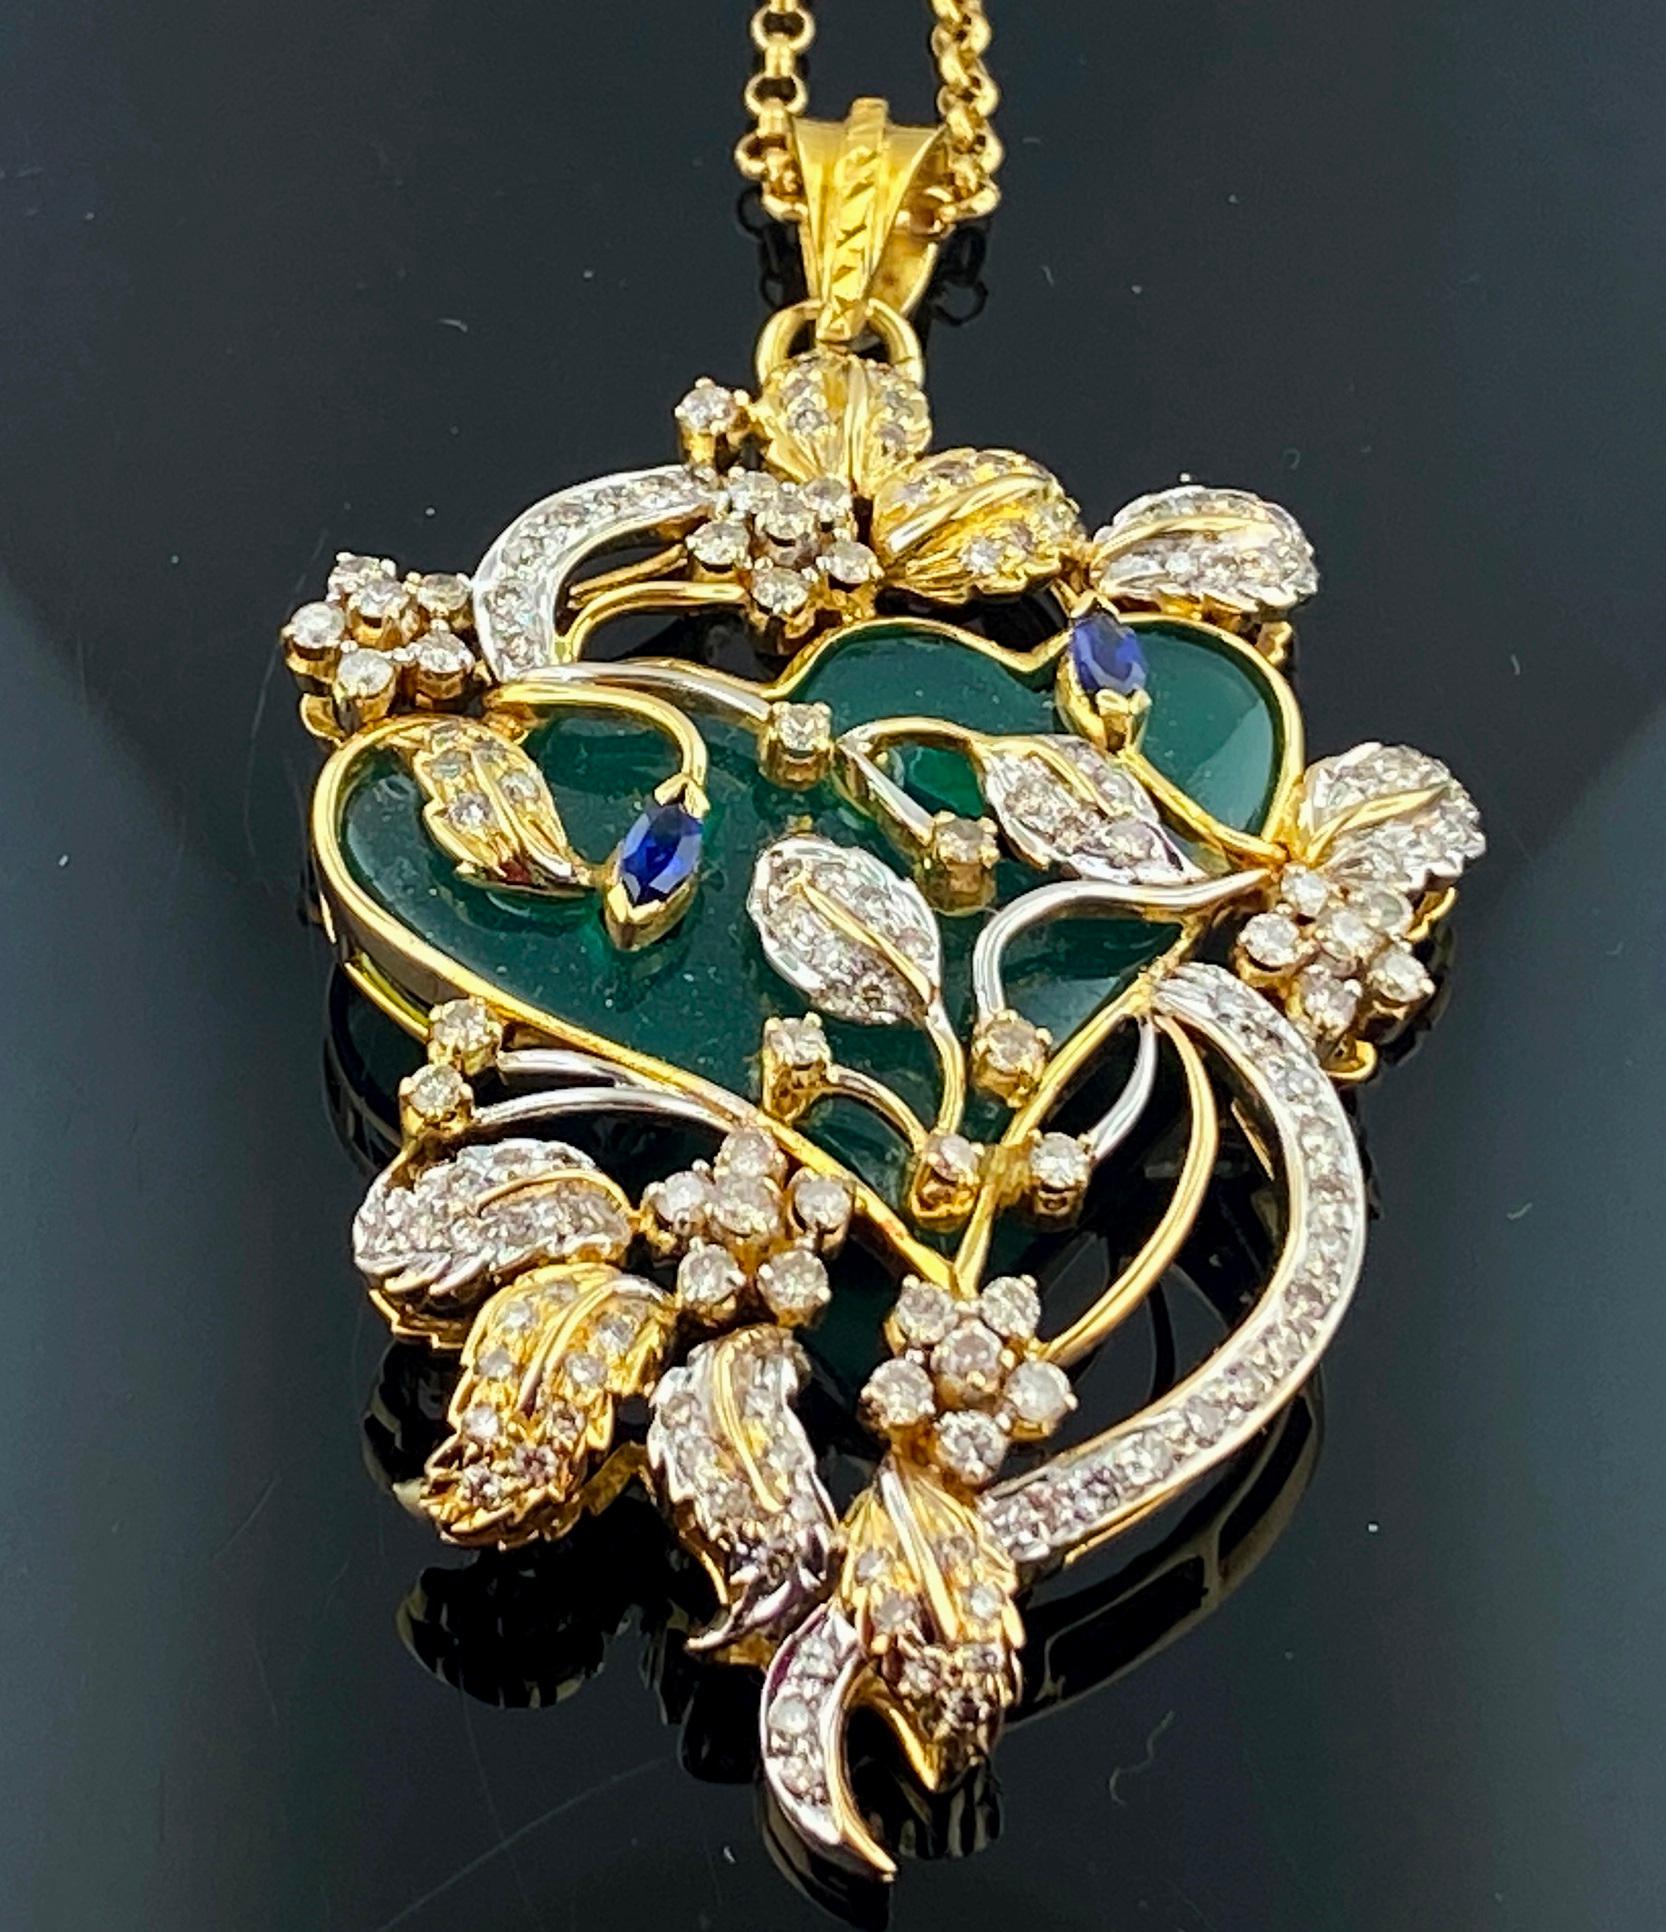 Set in 18 karat yellow gold, weighing 16 grams, are numerous small Round Brilliant Cut diamonds in leaf and flower designs weighing 1.50 carats, enhanced with Green Onyx plus two small Marquise cut Blue Sapphires, on an 18